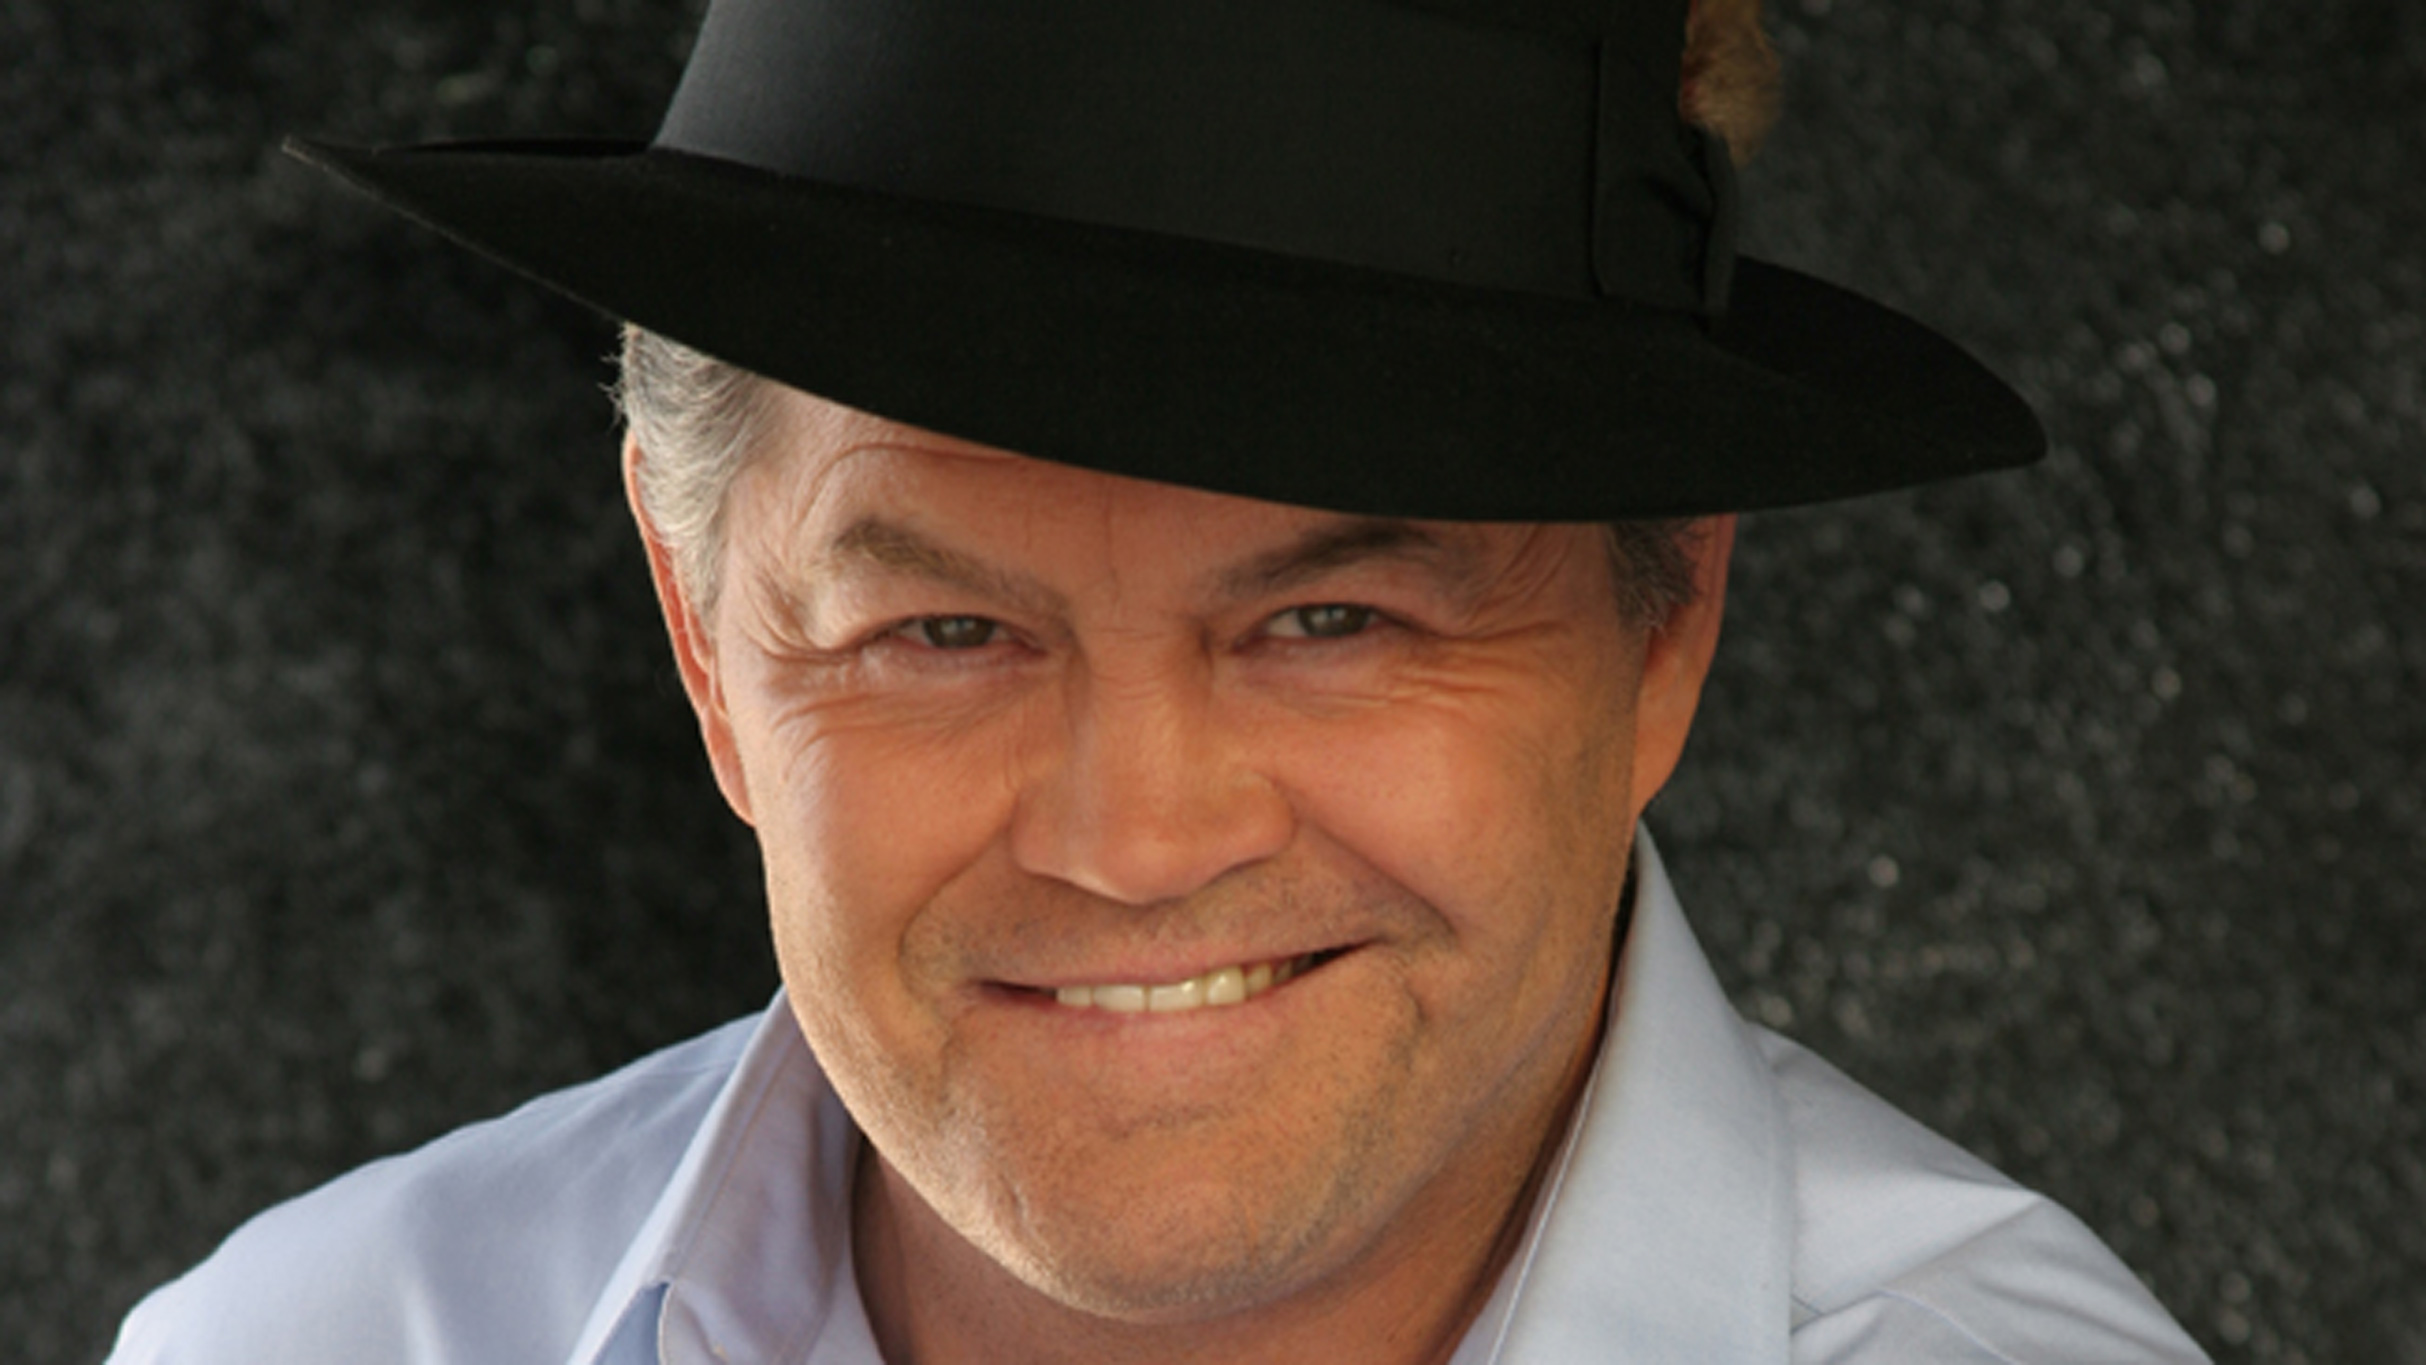 Micky Dolenz at Dick Howser Stadium